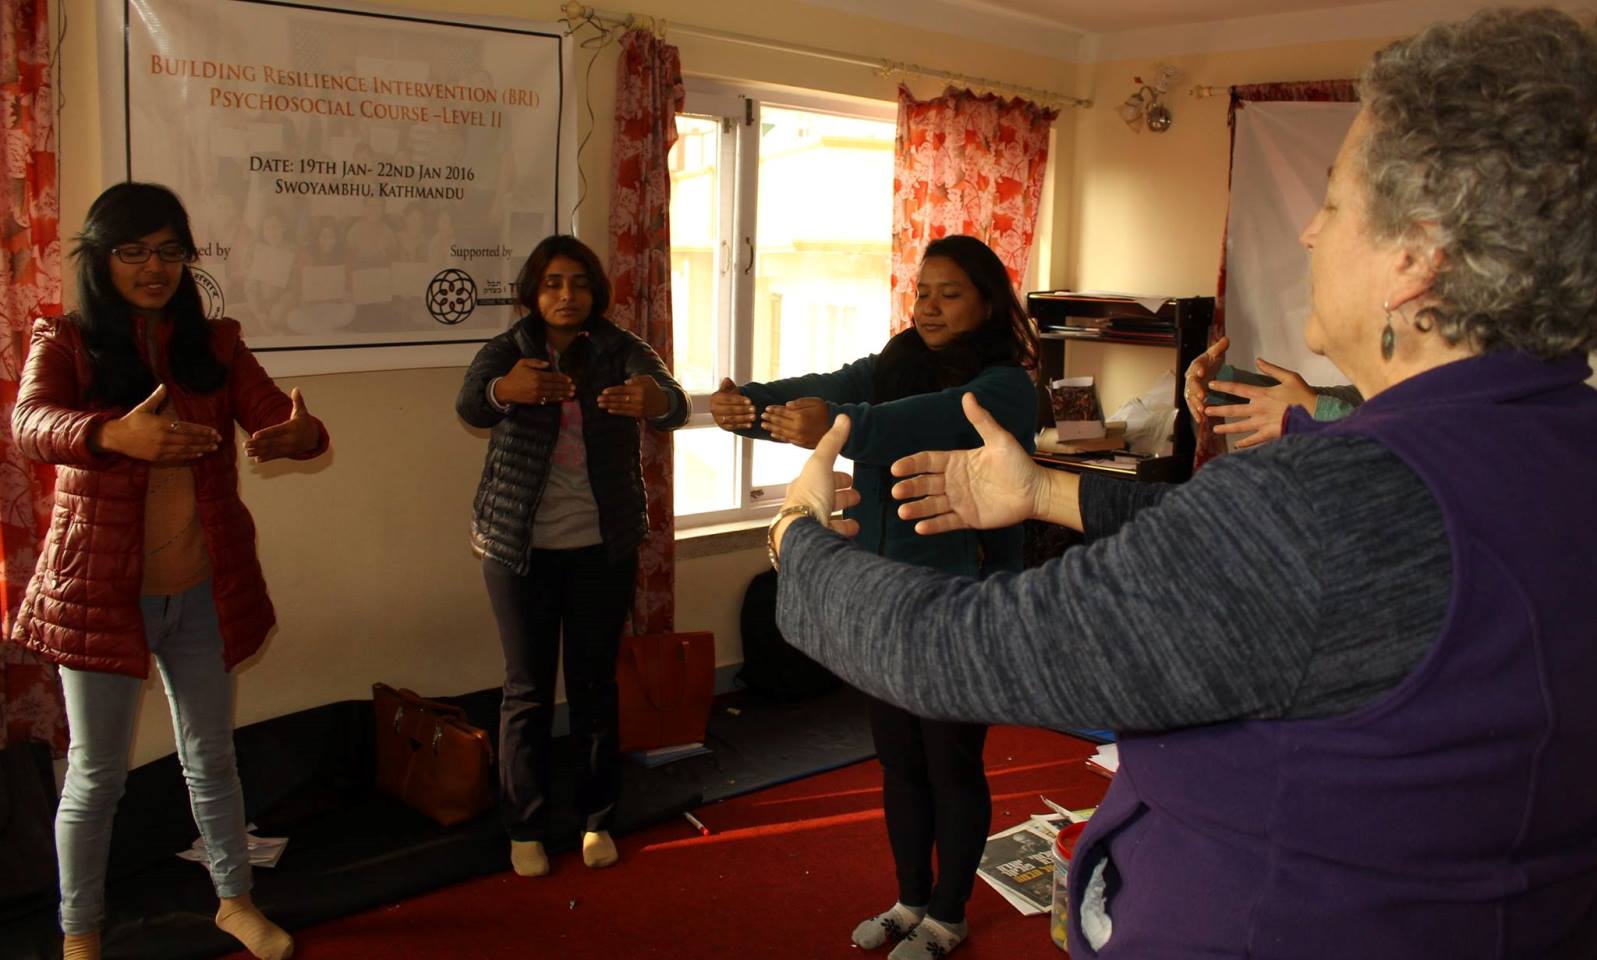  Naomi Baum, retired founder-director of the Resilience Unit at the Israel Center for the Treatment of Psychotrauma of Jerusalemâ€™s Herzog Hospital, teaching resilience techniques to Nepalese women. Photo via Facebook